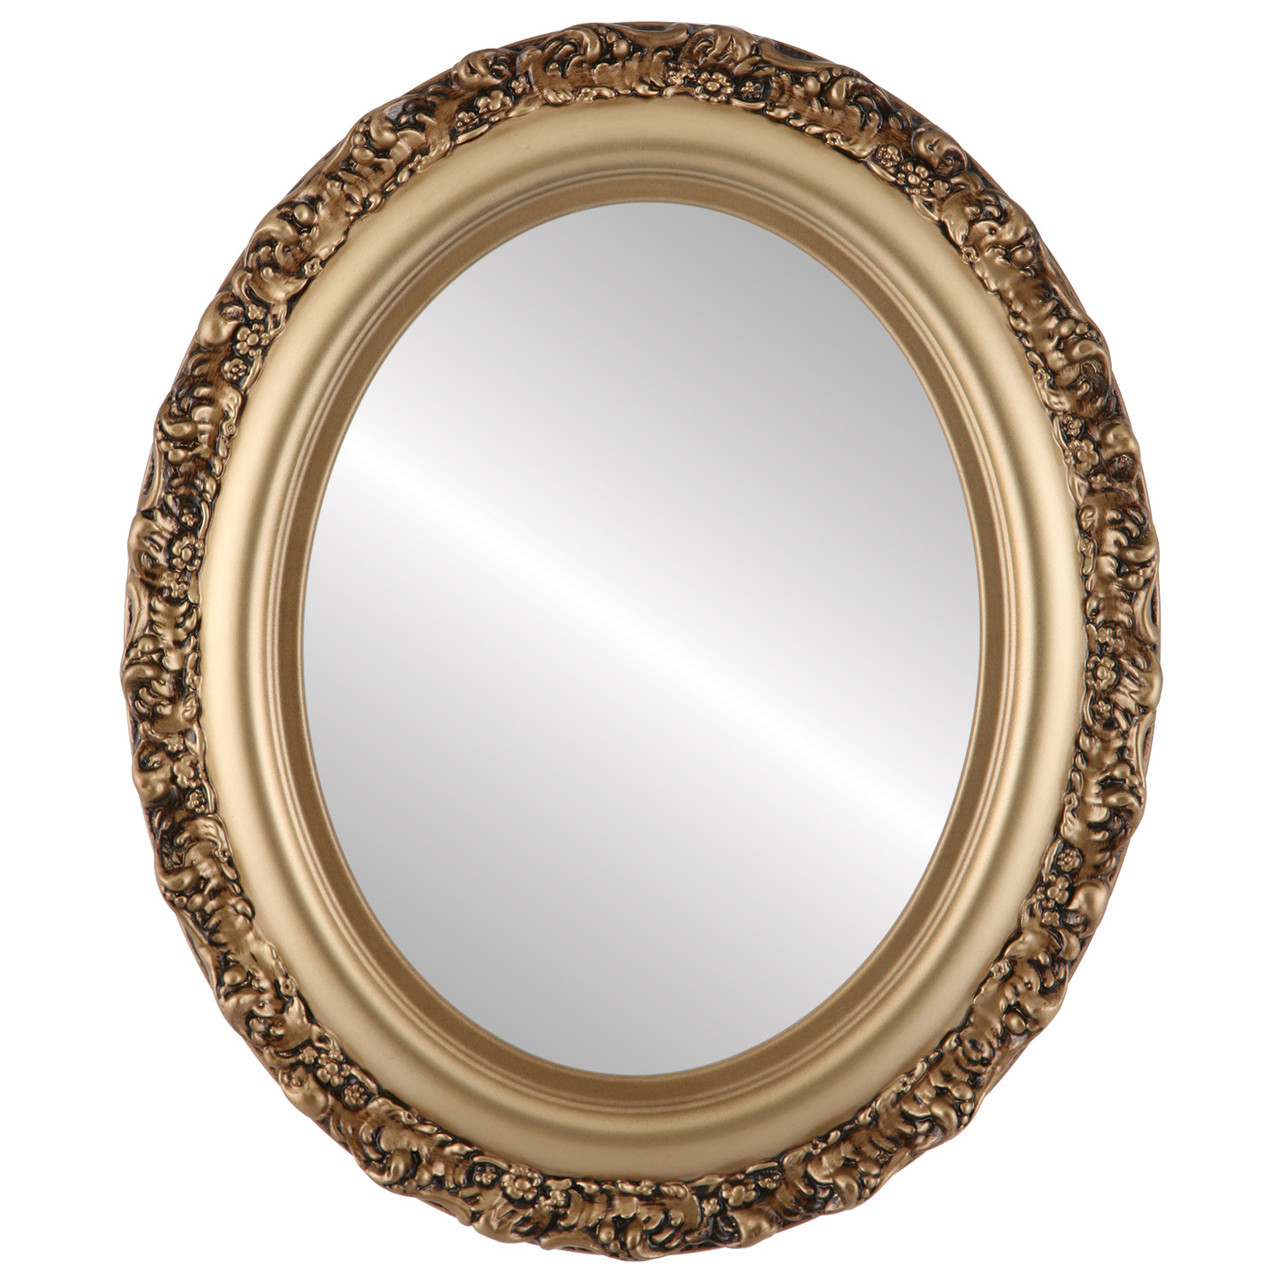 Rome Round Picture Frame - Antique Gold Leaf